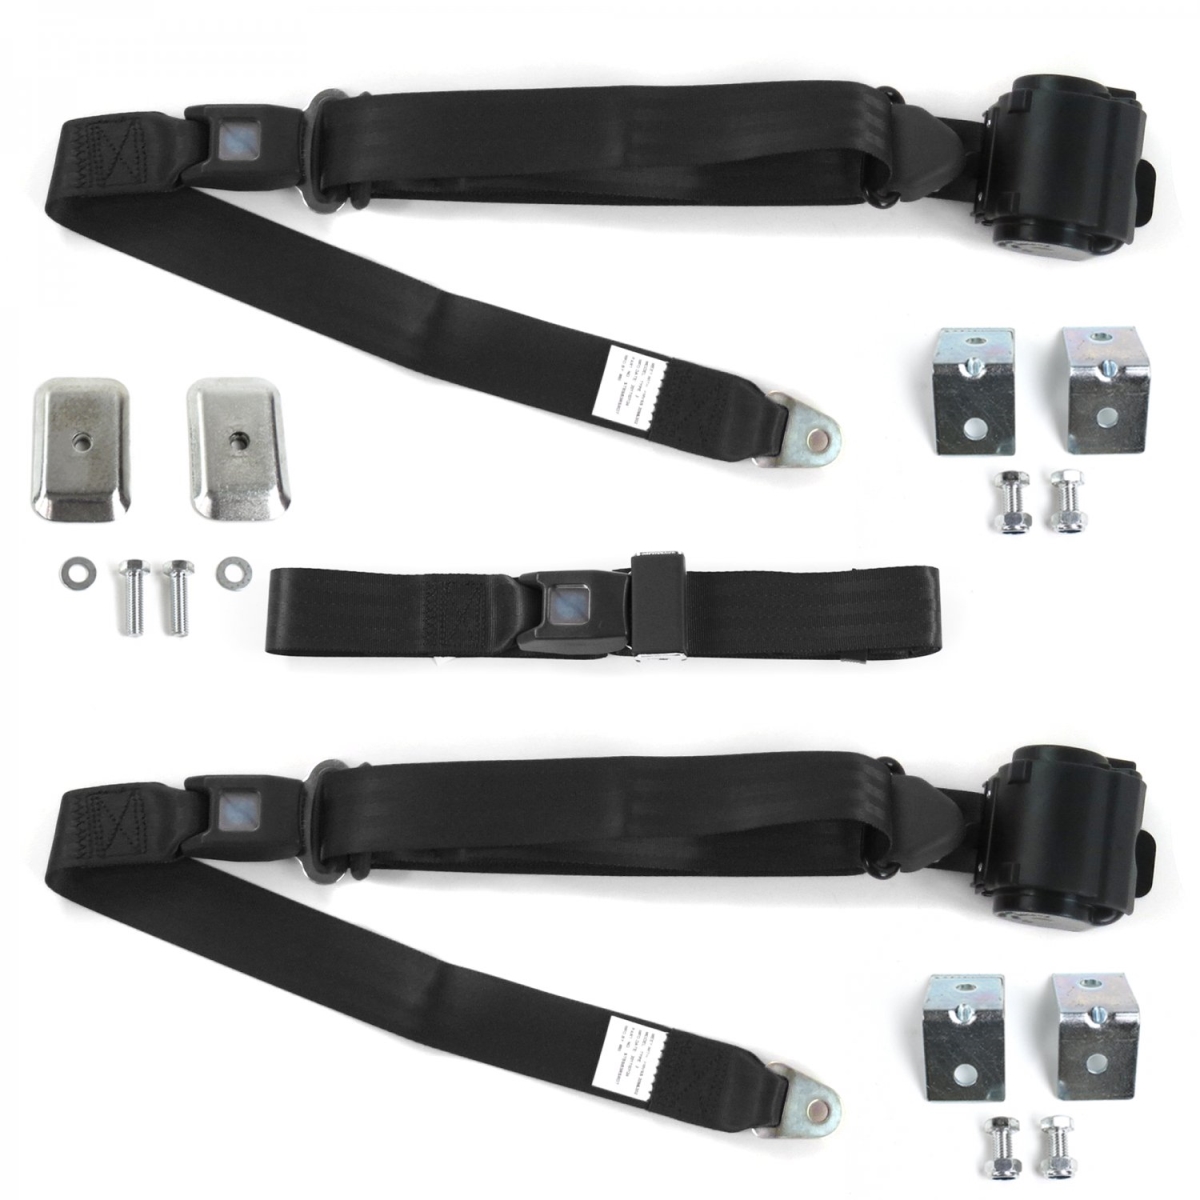 683671 Chevy Bel Air 1955-1957 Standard 3 Point Black Retractable Bench Seat Belt Kit with Bracketry - 3 Belts -  safeTboy